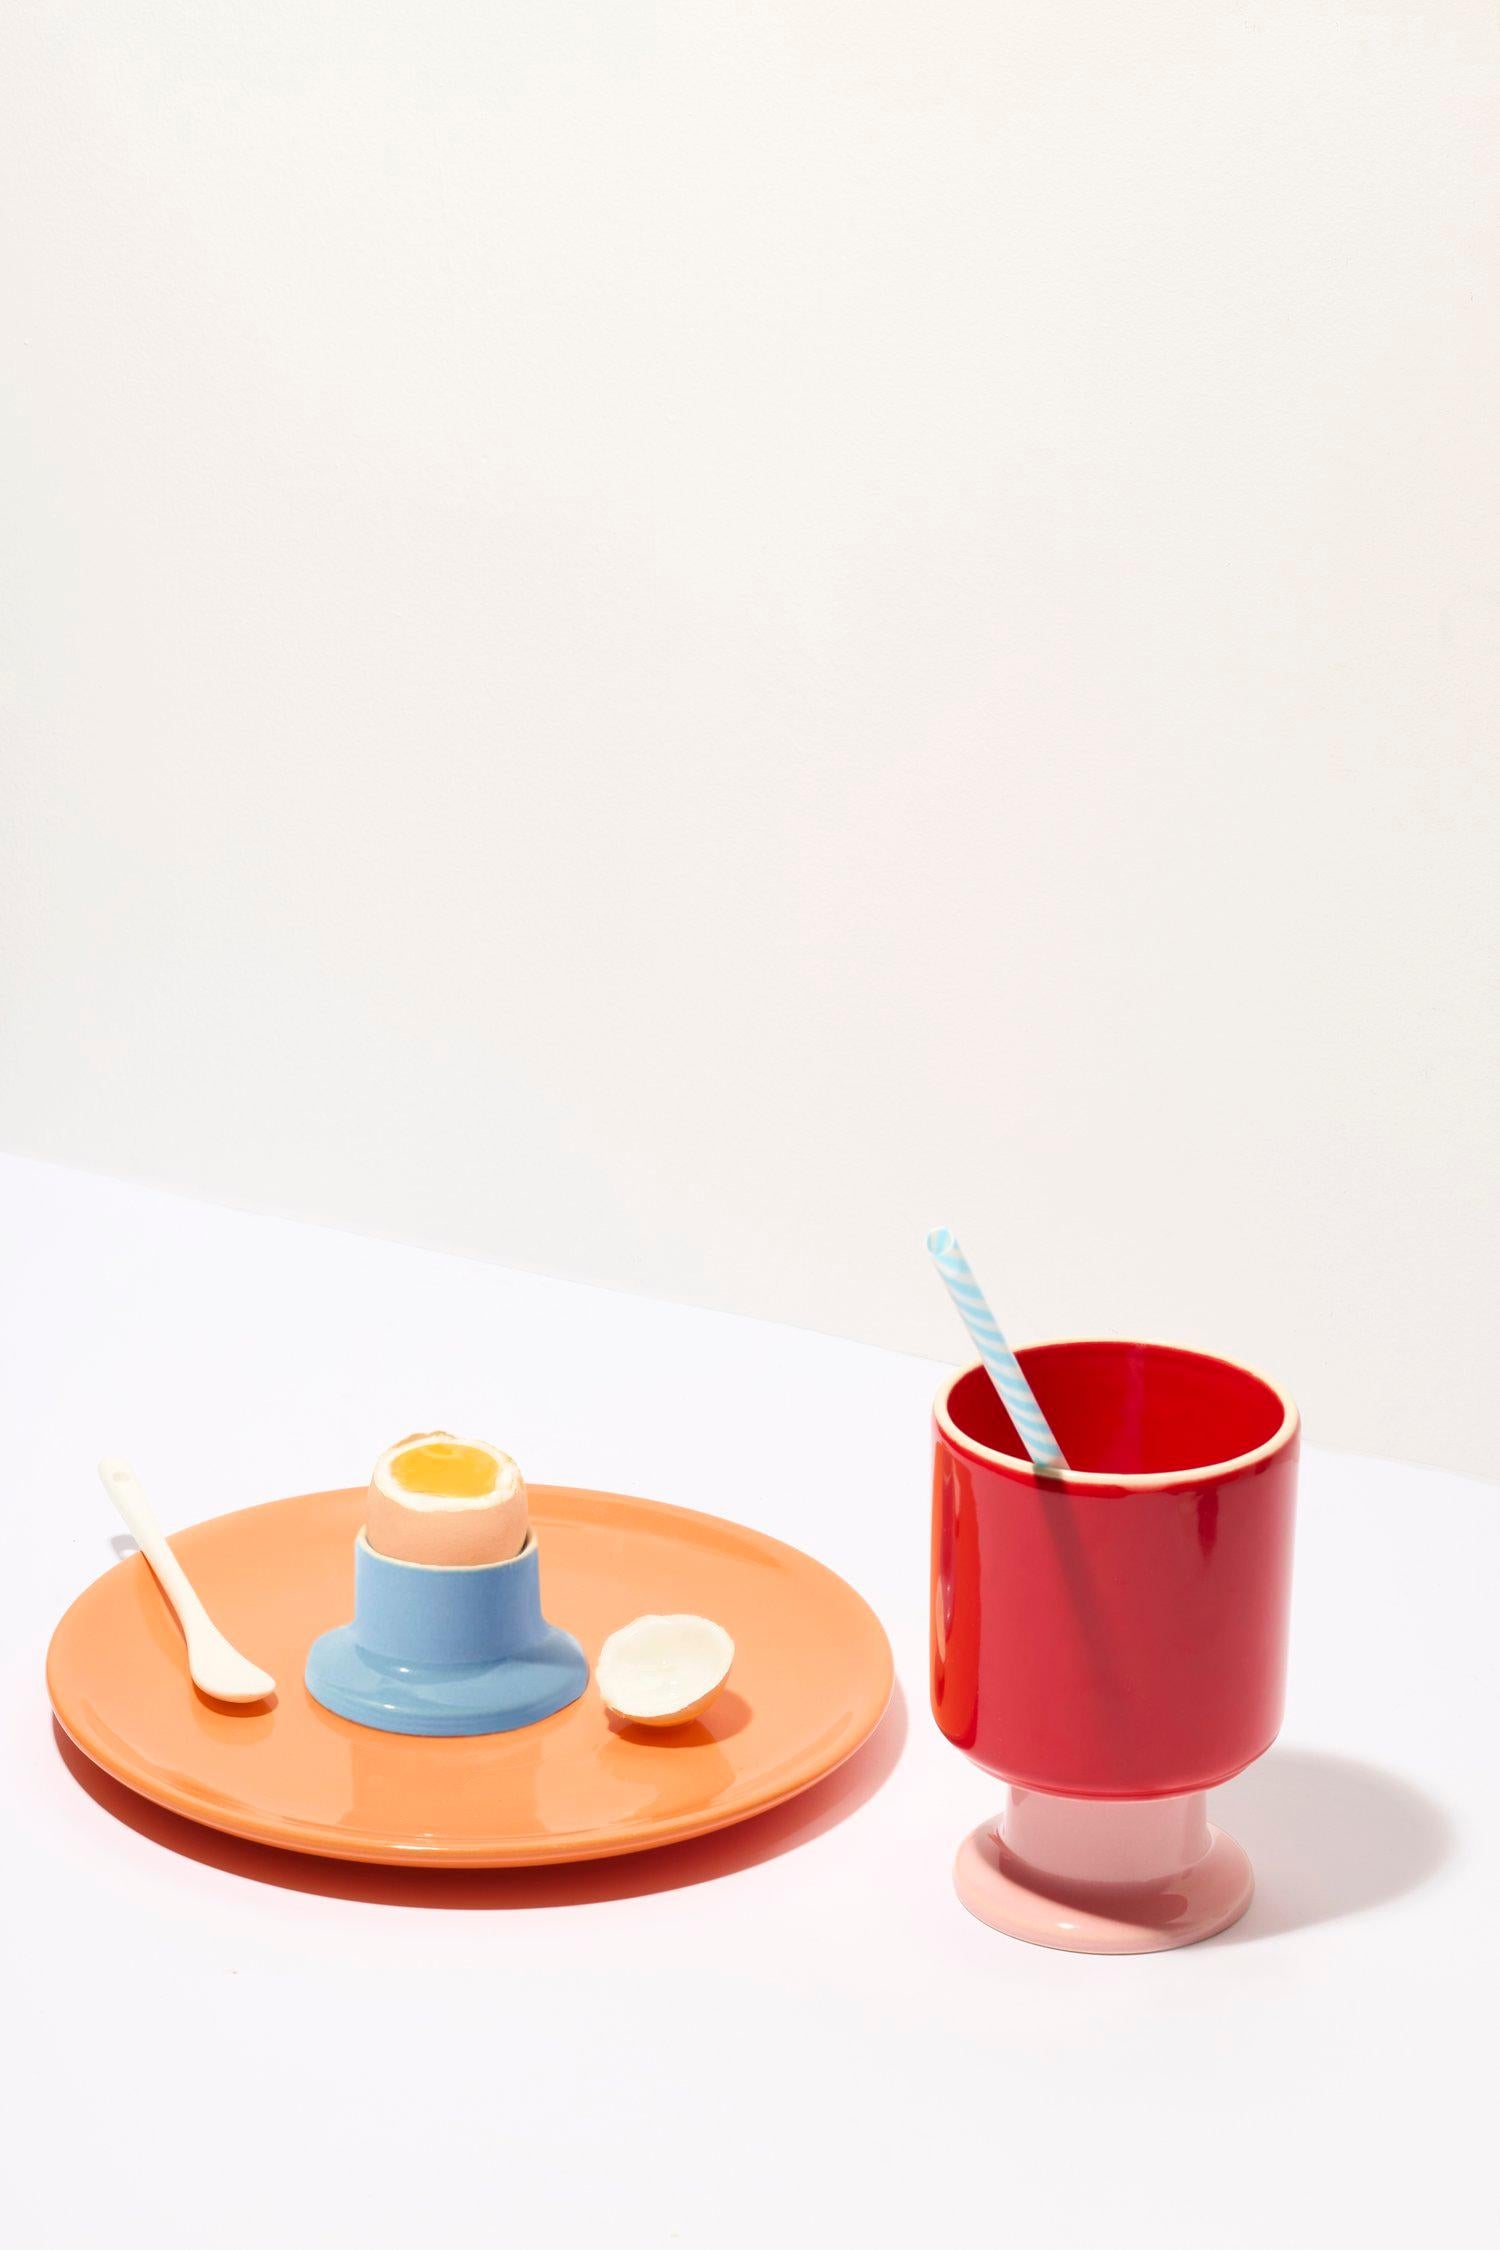 The egg holder JULA complements the OKO / Design breakfast set. This small, colorful tableware piece will brighten up any breakfast! Selling in set of two. 